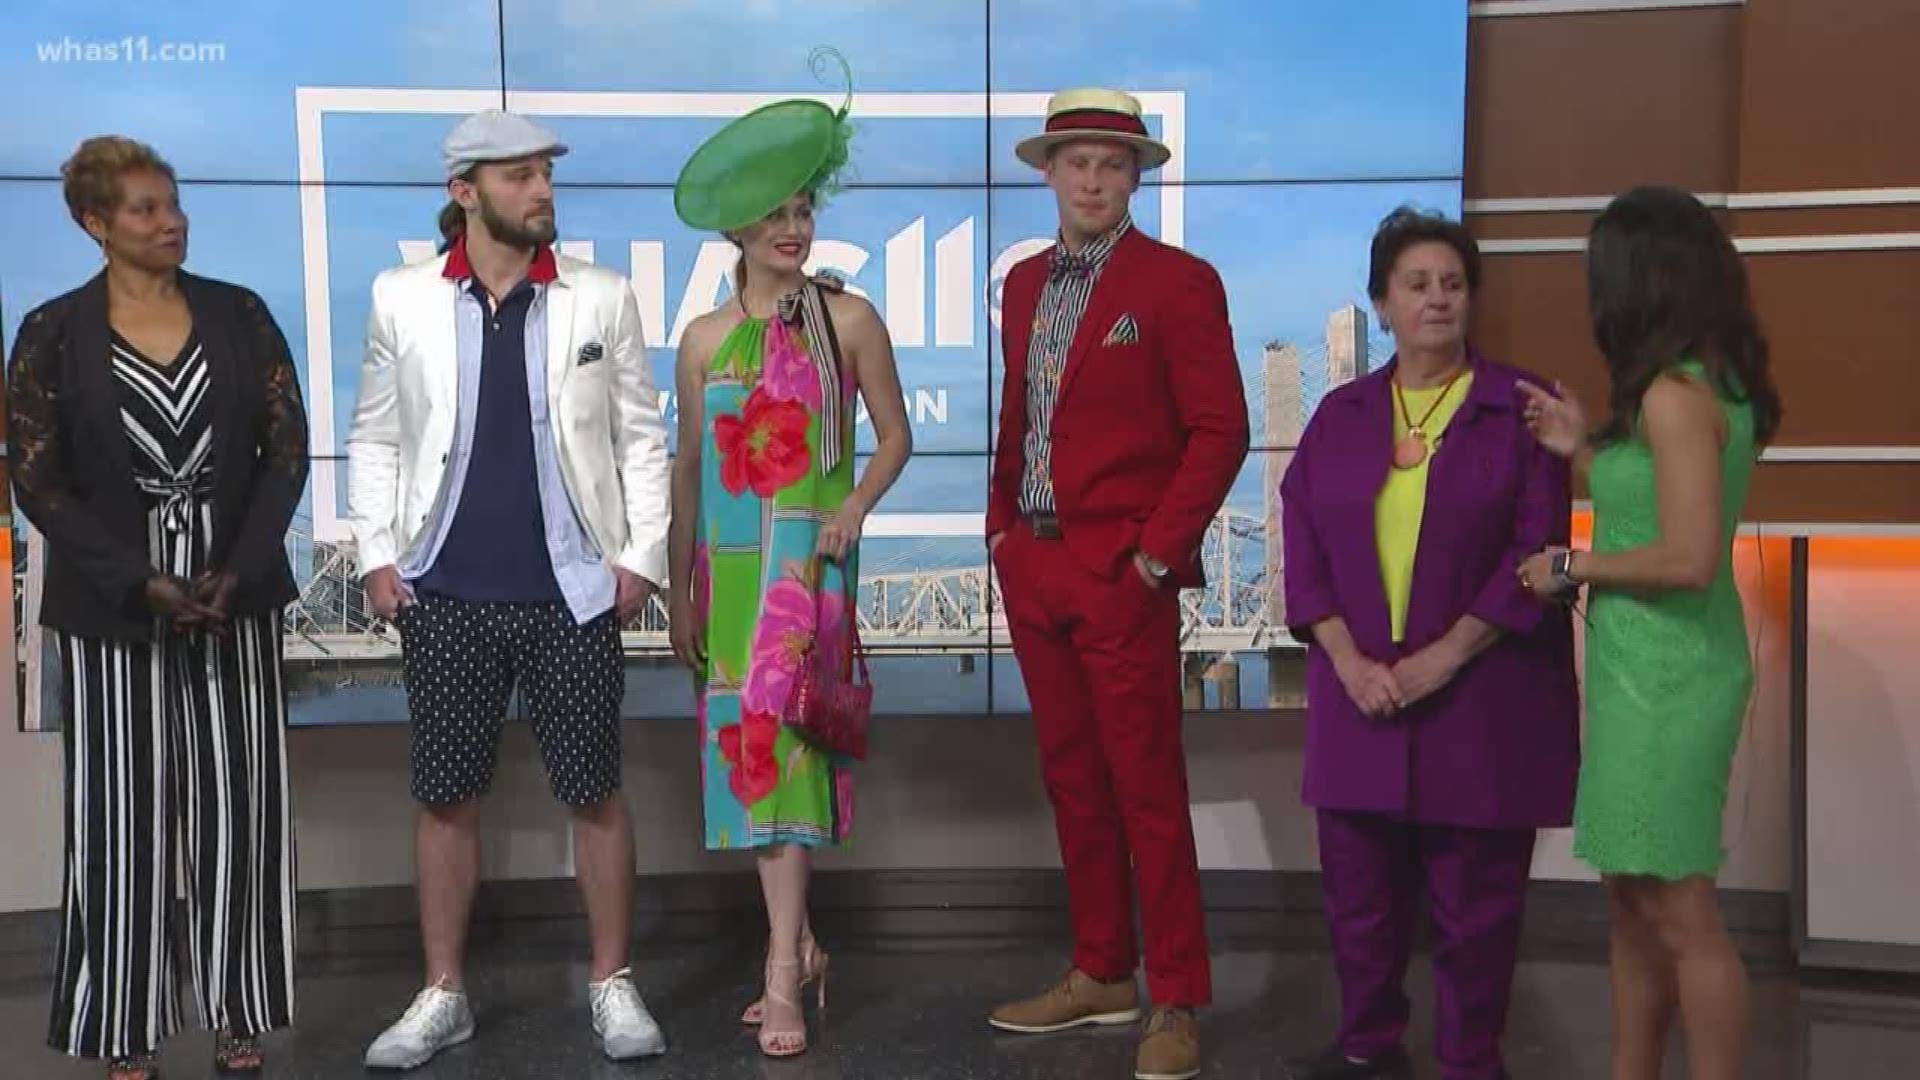 If you haven't already thought about your look for the Kentucky Derby, here are some ideas from an expert.